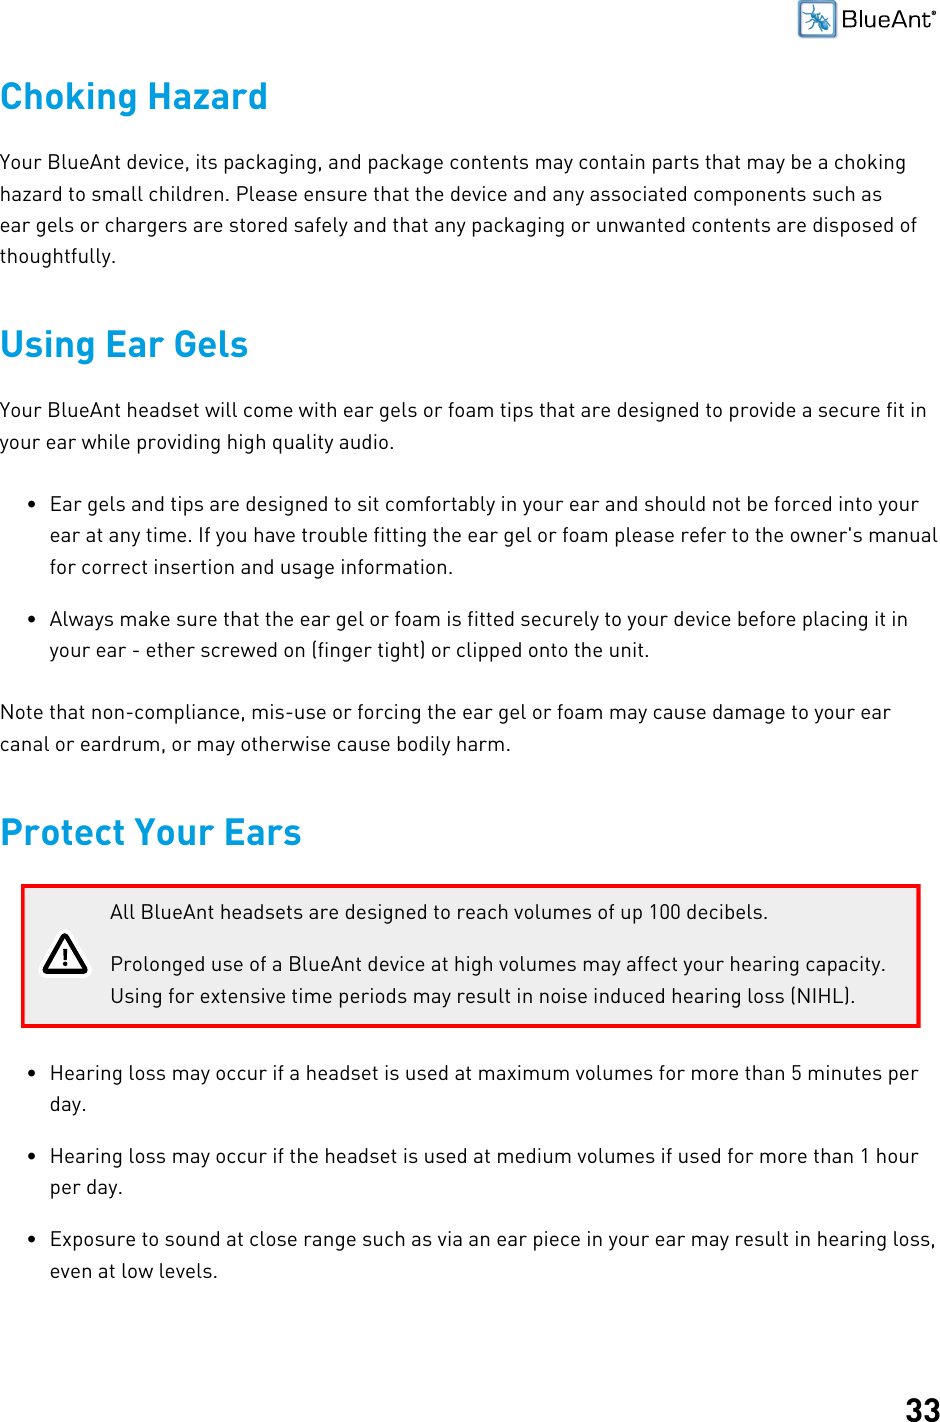 33Choking HazardYour BlueAnt device, its packaging, and package contents may contain parts that may be a chokinghazard to small children. Please ensure that the device and any associated components such asear gels or chargers are stored safely and that any packaging or unwanted contents are disposed ofthoughtfully.Using Ear GelsYour BlueAnt headset will come with ear gels or foam tips that are designed to provide a secure fit inyour ear while providing high quality audio.• Ear gels and tips are designed to sit comfortably in your ear and should not be forced into yourear at any time. If you have trouble fitting the ear gel or foam please refer to the owner&apos;s manualfor correct insertion and usage information.• Always make sure that the ear gel or foam is fitted securely to your device before placing it inyour ear - ether screwed on (finger tight) or clipped onto the unit.Note that non-compliance, mis-use or forcing the ear gel or foam may cause damage to your earcanal or eardrum, or may otherwise cause bodily harm.Protect Your EarsAll BlueAnt headsets are designed to reach volumes of up 100 decibels.Prolonged use of a BlueAnt device at high volumes may affect your hearing capacity.Using for extensive time periods may result in noise induced hearing loss (NIHL).• Hearing loss may occur if a headset is used at maximum volumes for more than 5 minutes perday.• Hearing loss may occur if the headset is used at medium volumes if used for more than 1 hourper day.• Exposure to sound at close range such as via an ear piece in your ear may result in hearing loss,even at low levels.